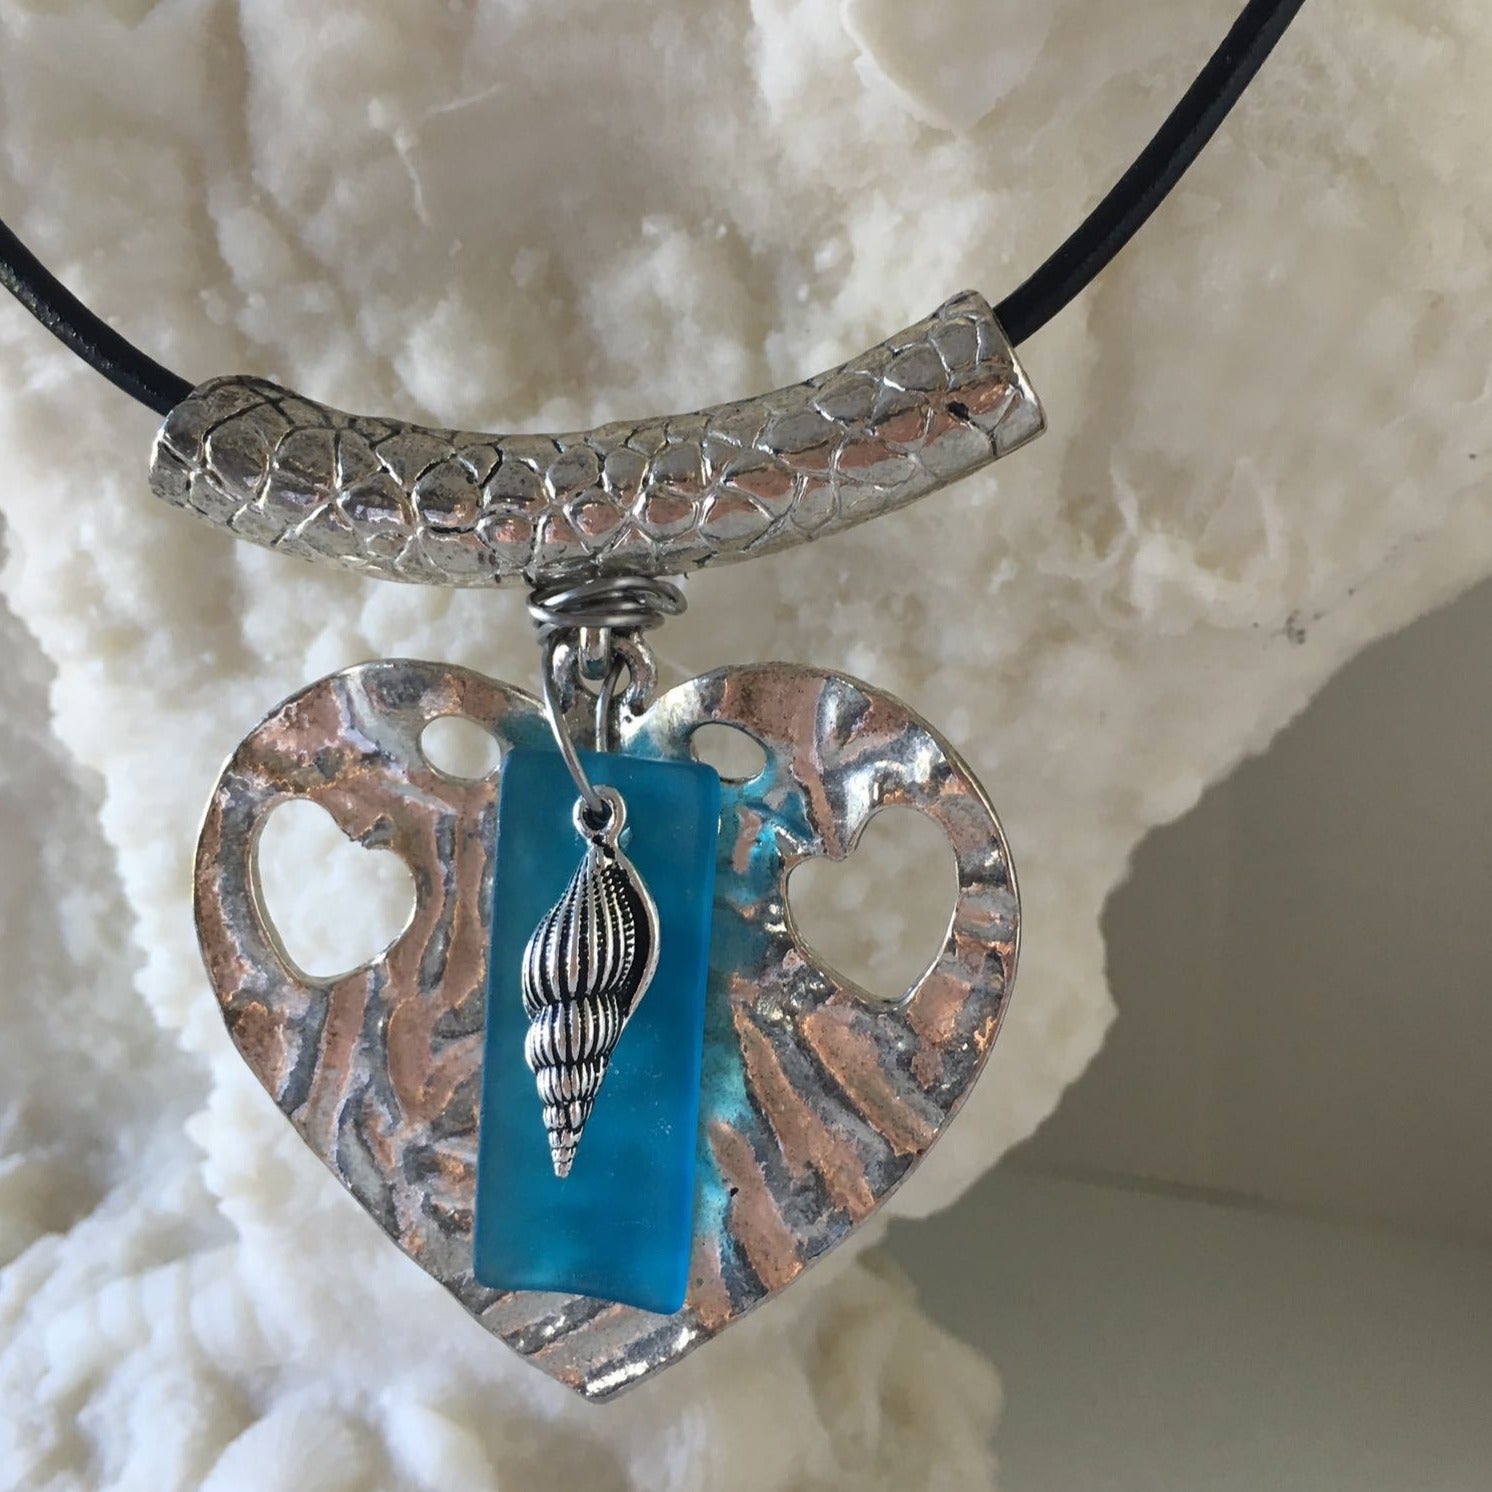 Necklace - The Sea has my Heart